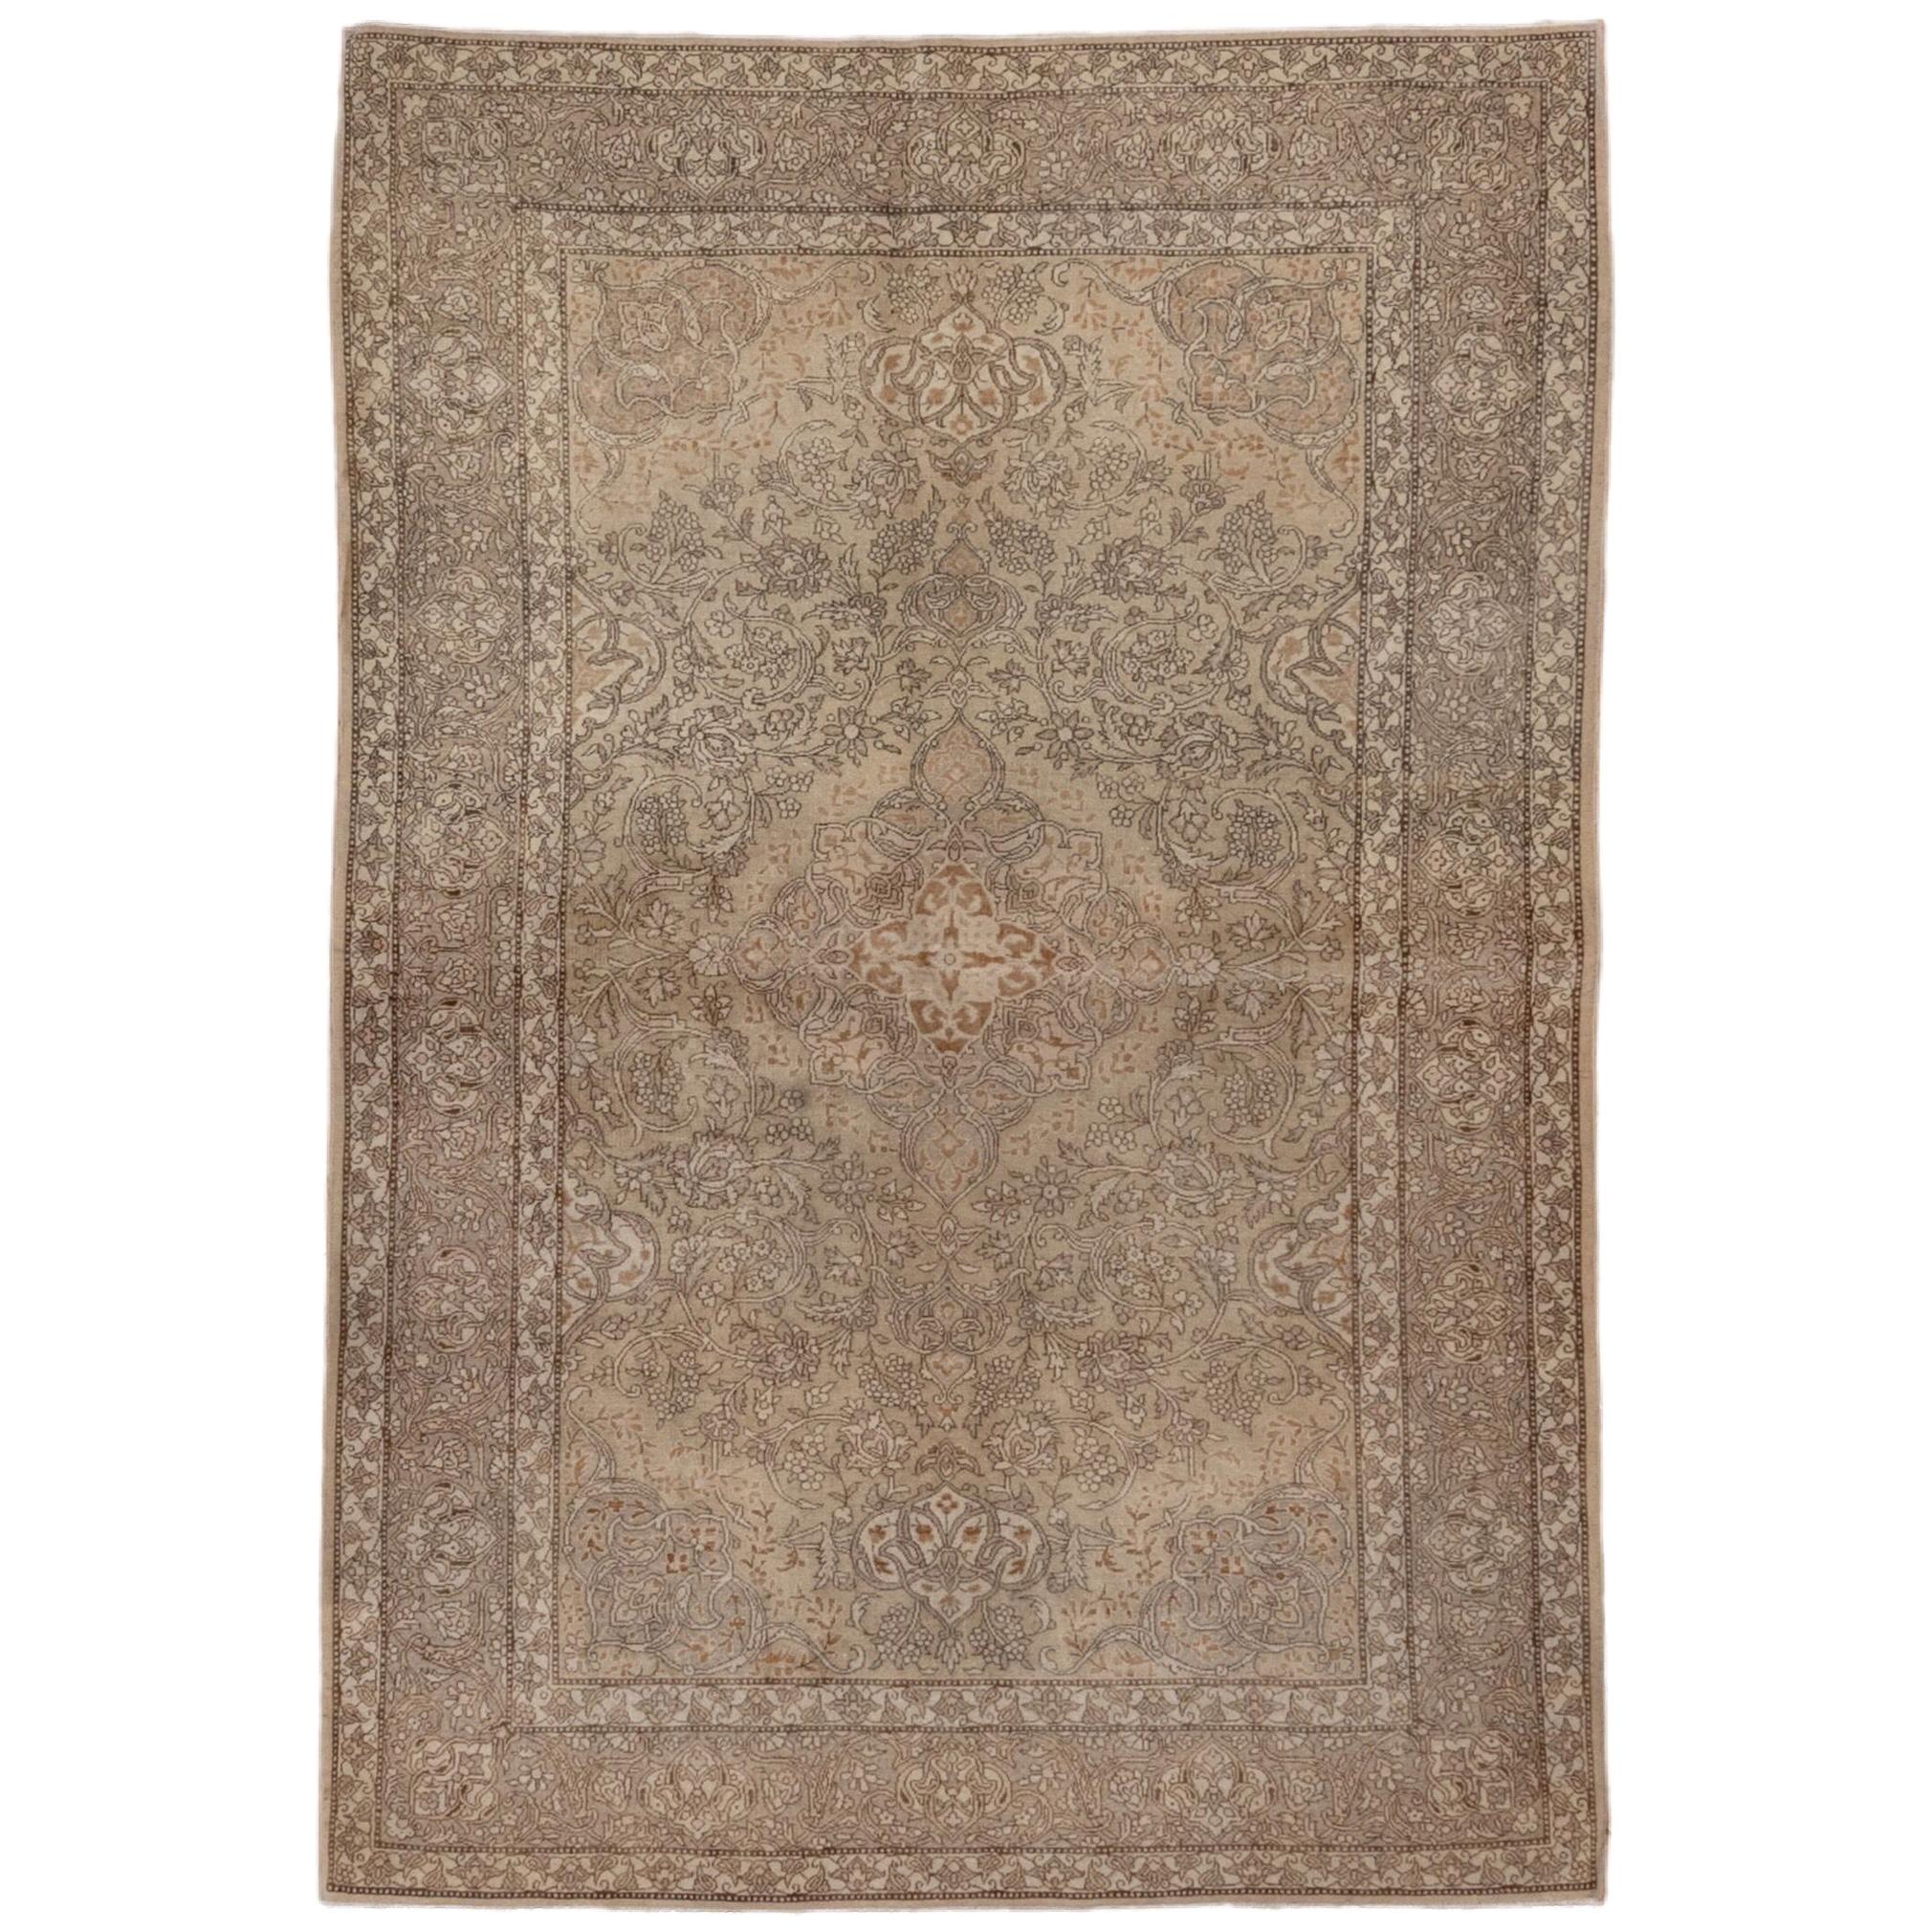 Tone on Tone Antique Persian Kashan Scatter Rug, Circa 1940s For Sale